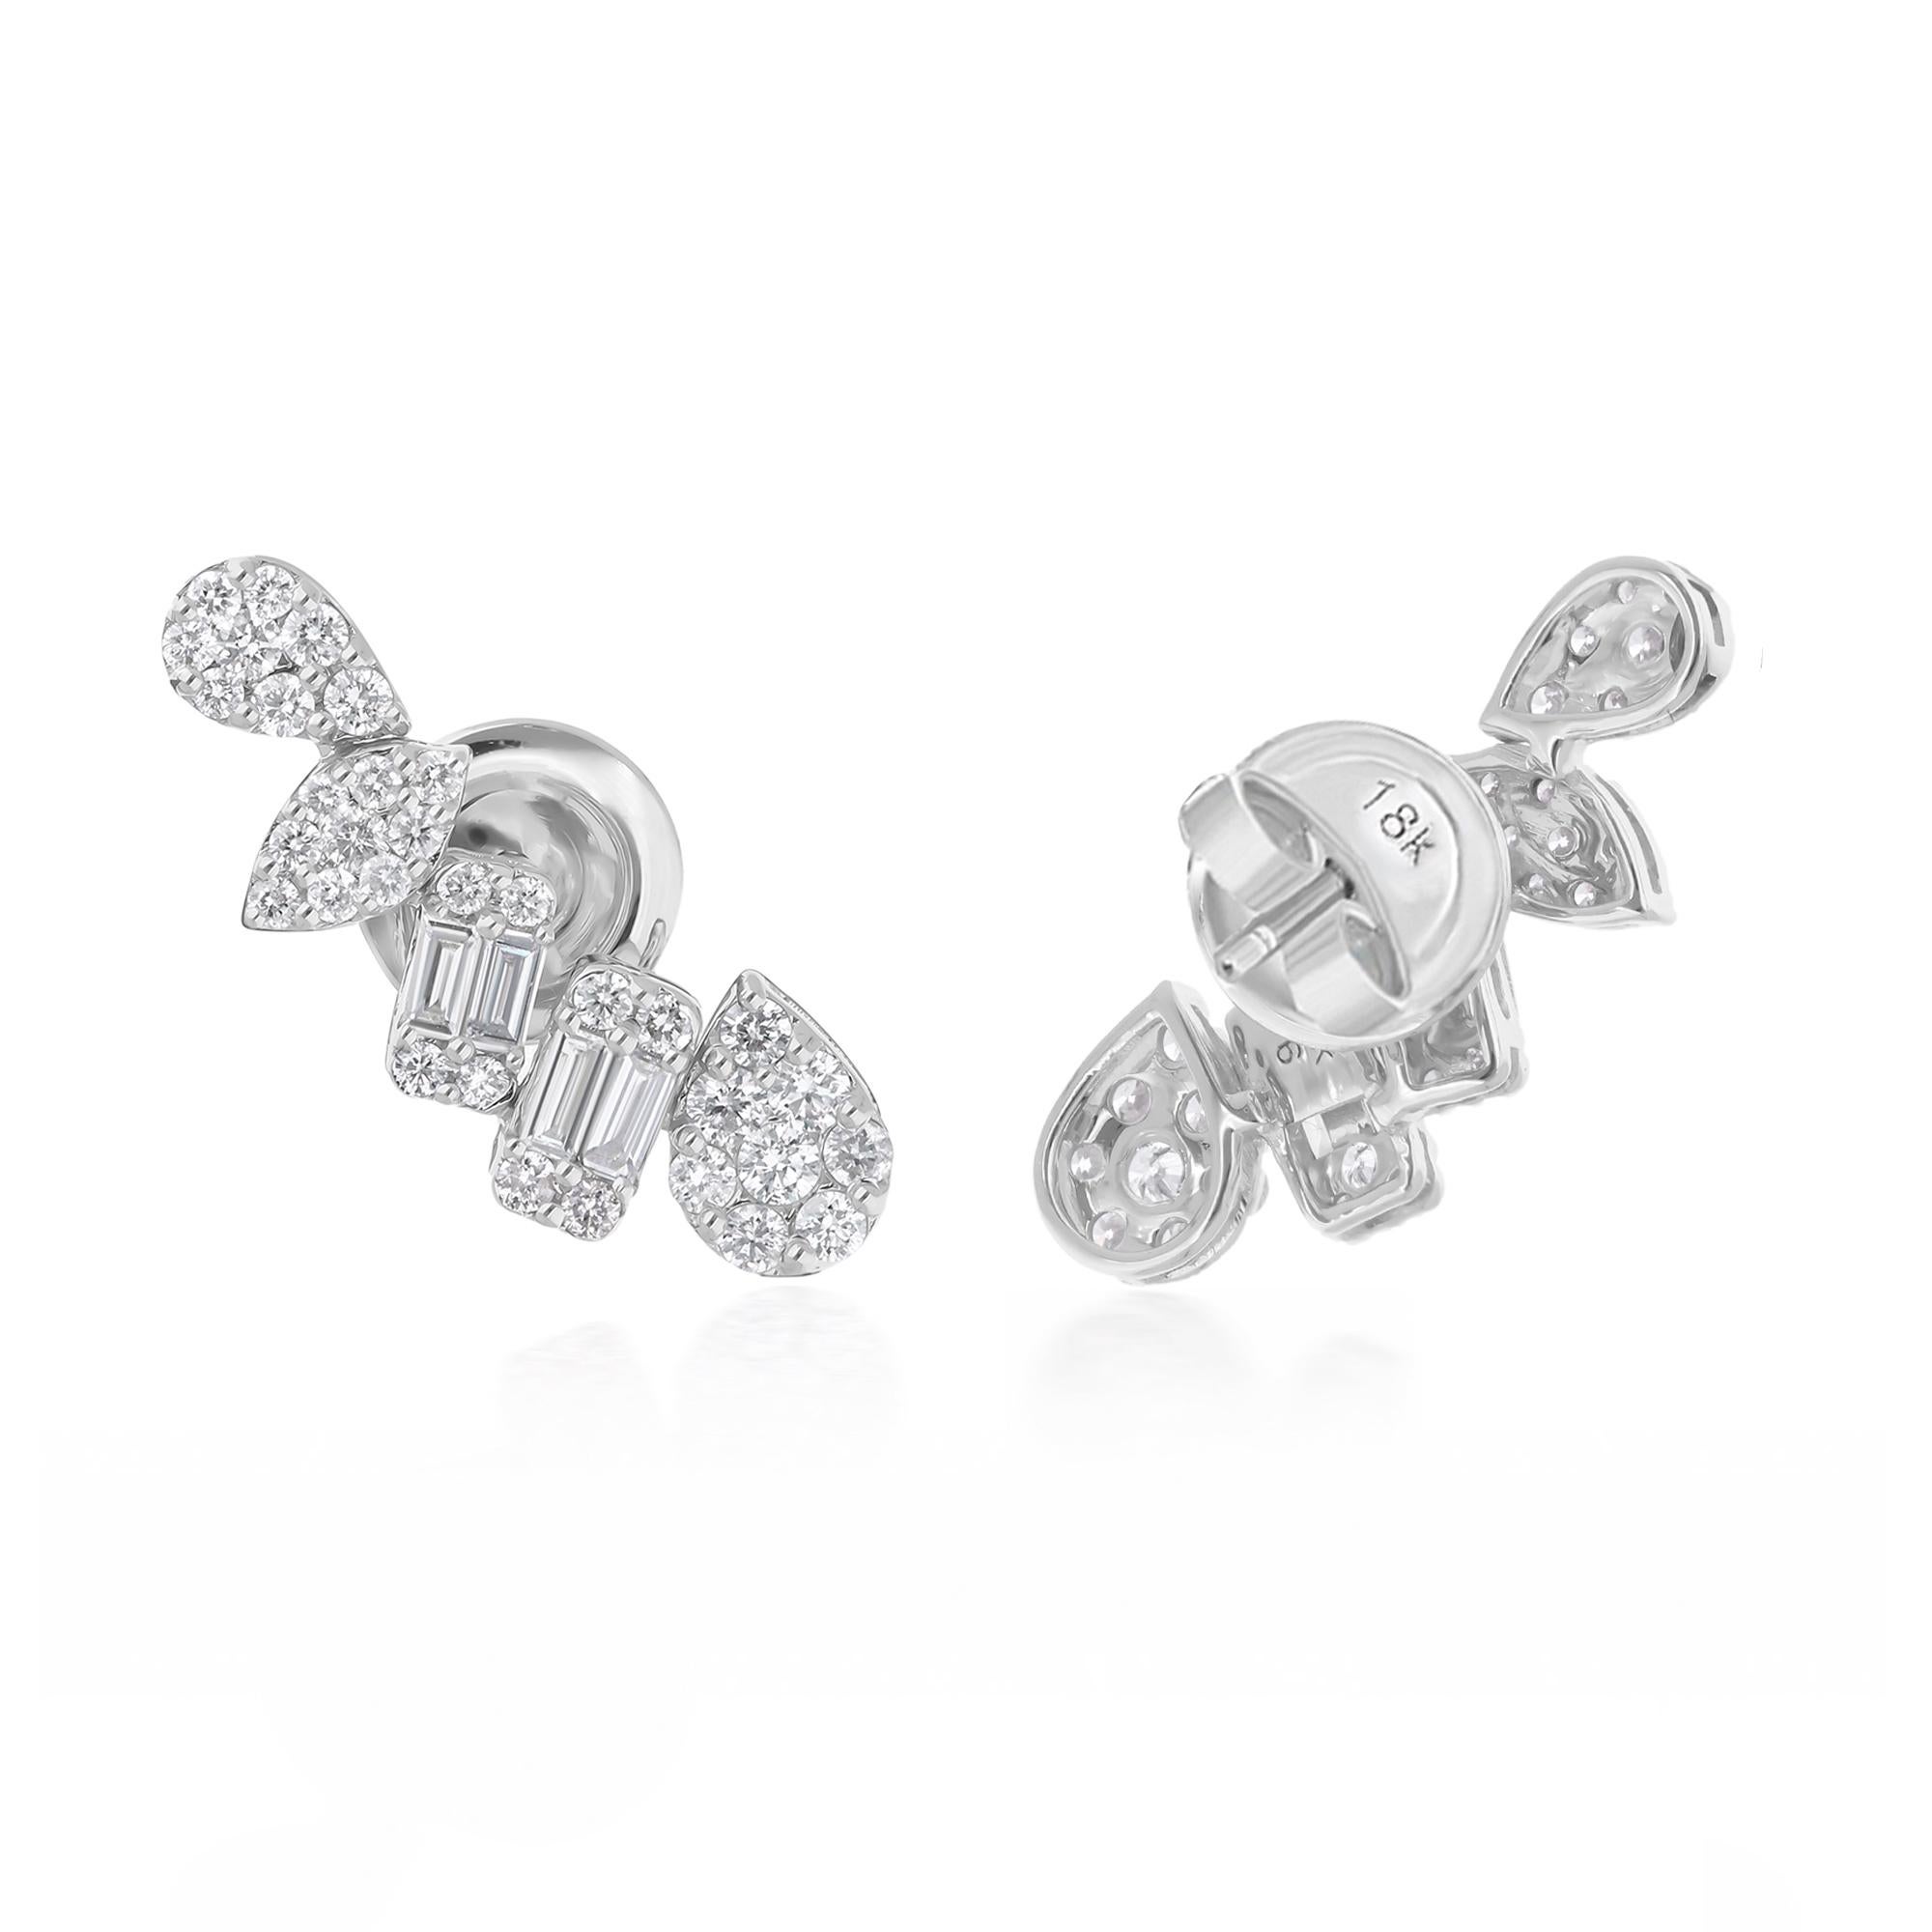 Set in lustrous 18 Karat White Gold, these earrings boast a luxurious and enduring beauty. The cool, silvery hue of white gold serves as the perfect backdrop for the fiery brilliance of the diamonds, enhancing their luminosity and creating an aura